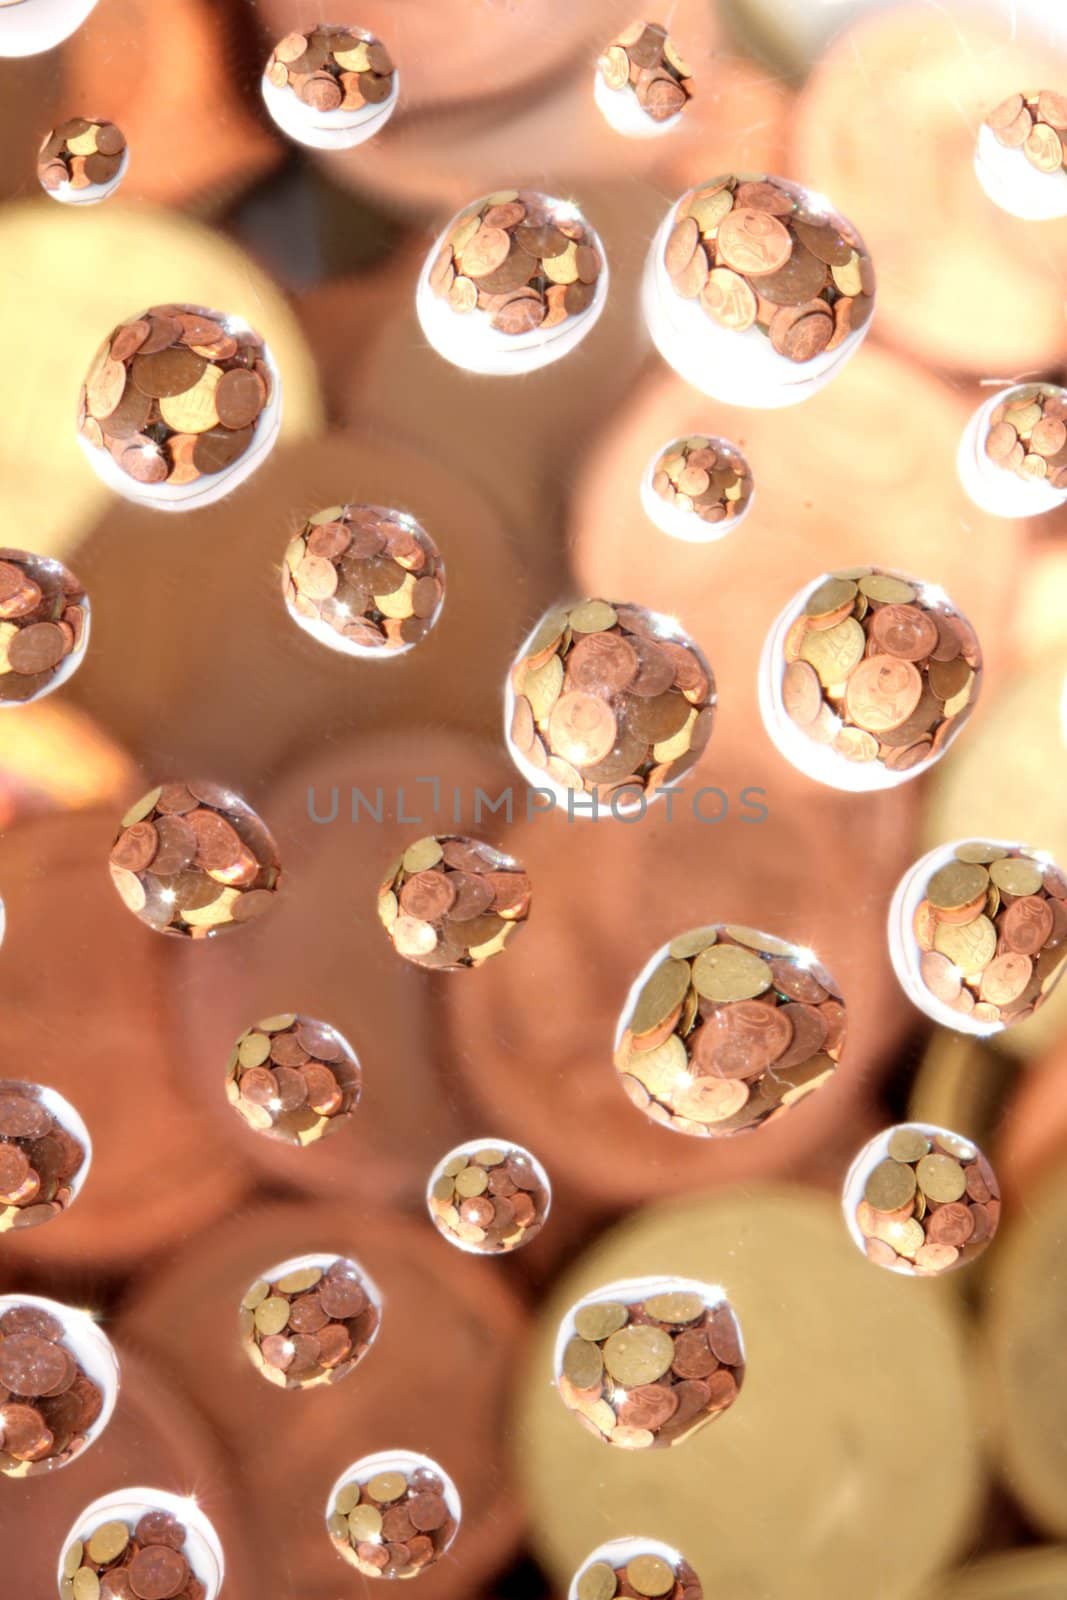 euro coins in water drops